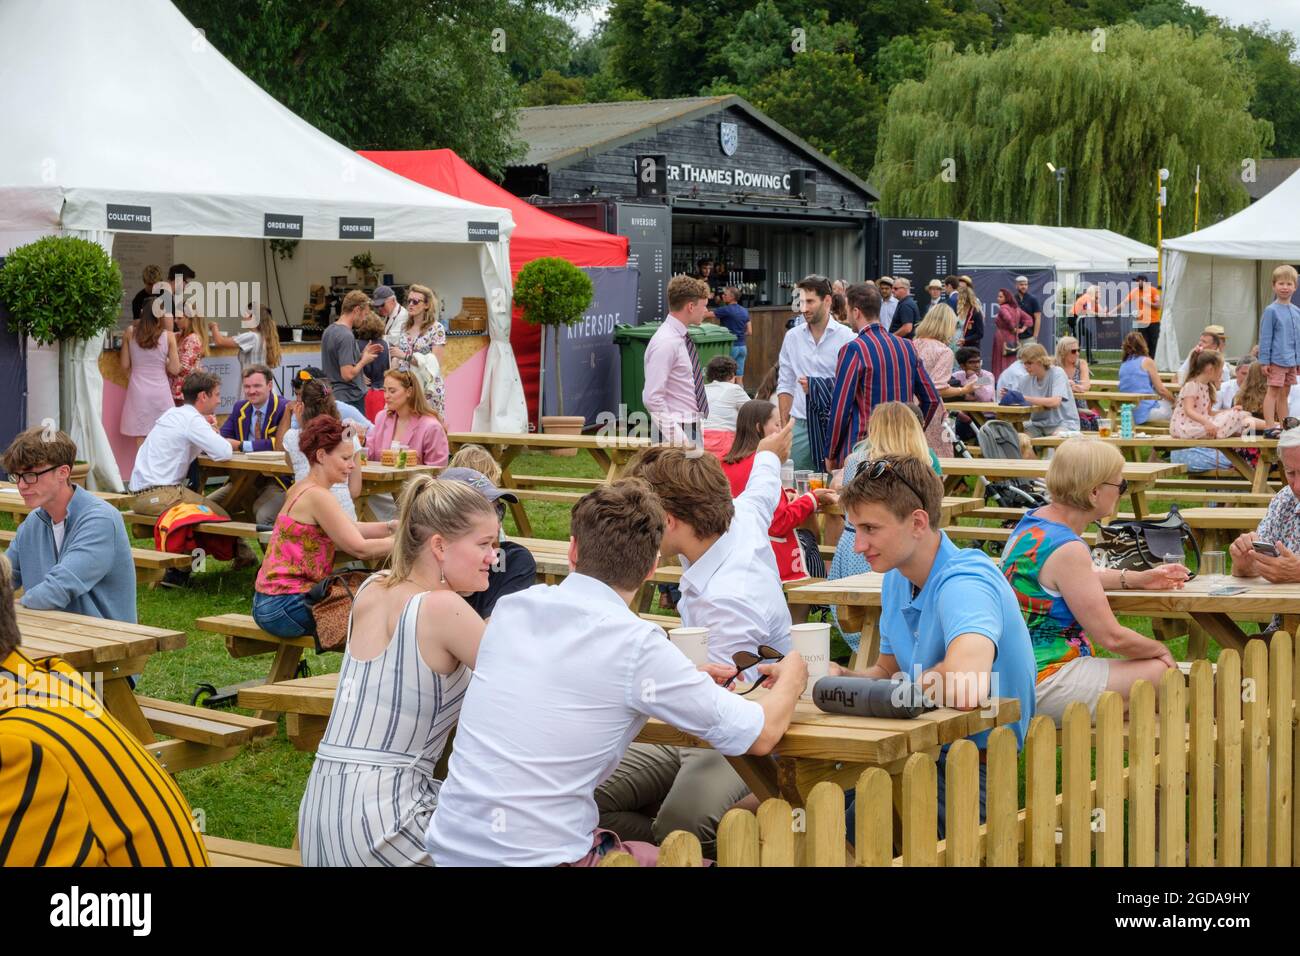 The refreshment area and bar at the Upper Thames Rowing Club, Henley Royal Regatta 2021 Stock Photo